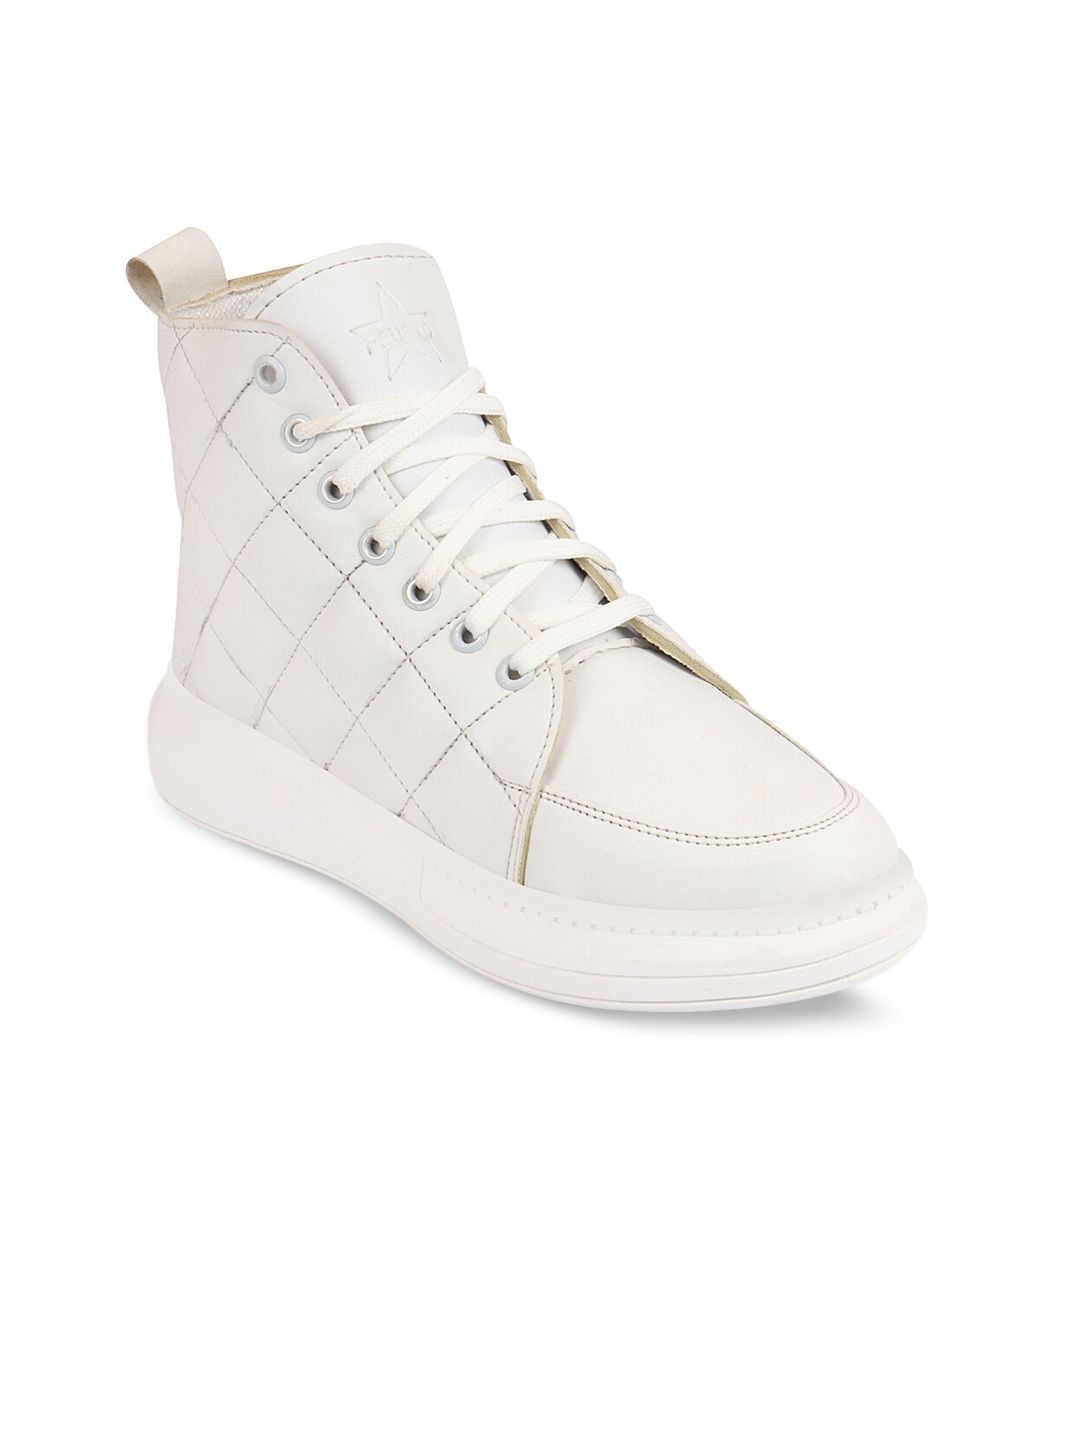 FAUSTO Women Striped Lightweight Mid Top Sneakers Price in India